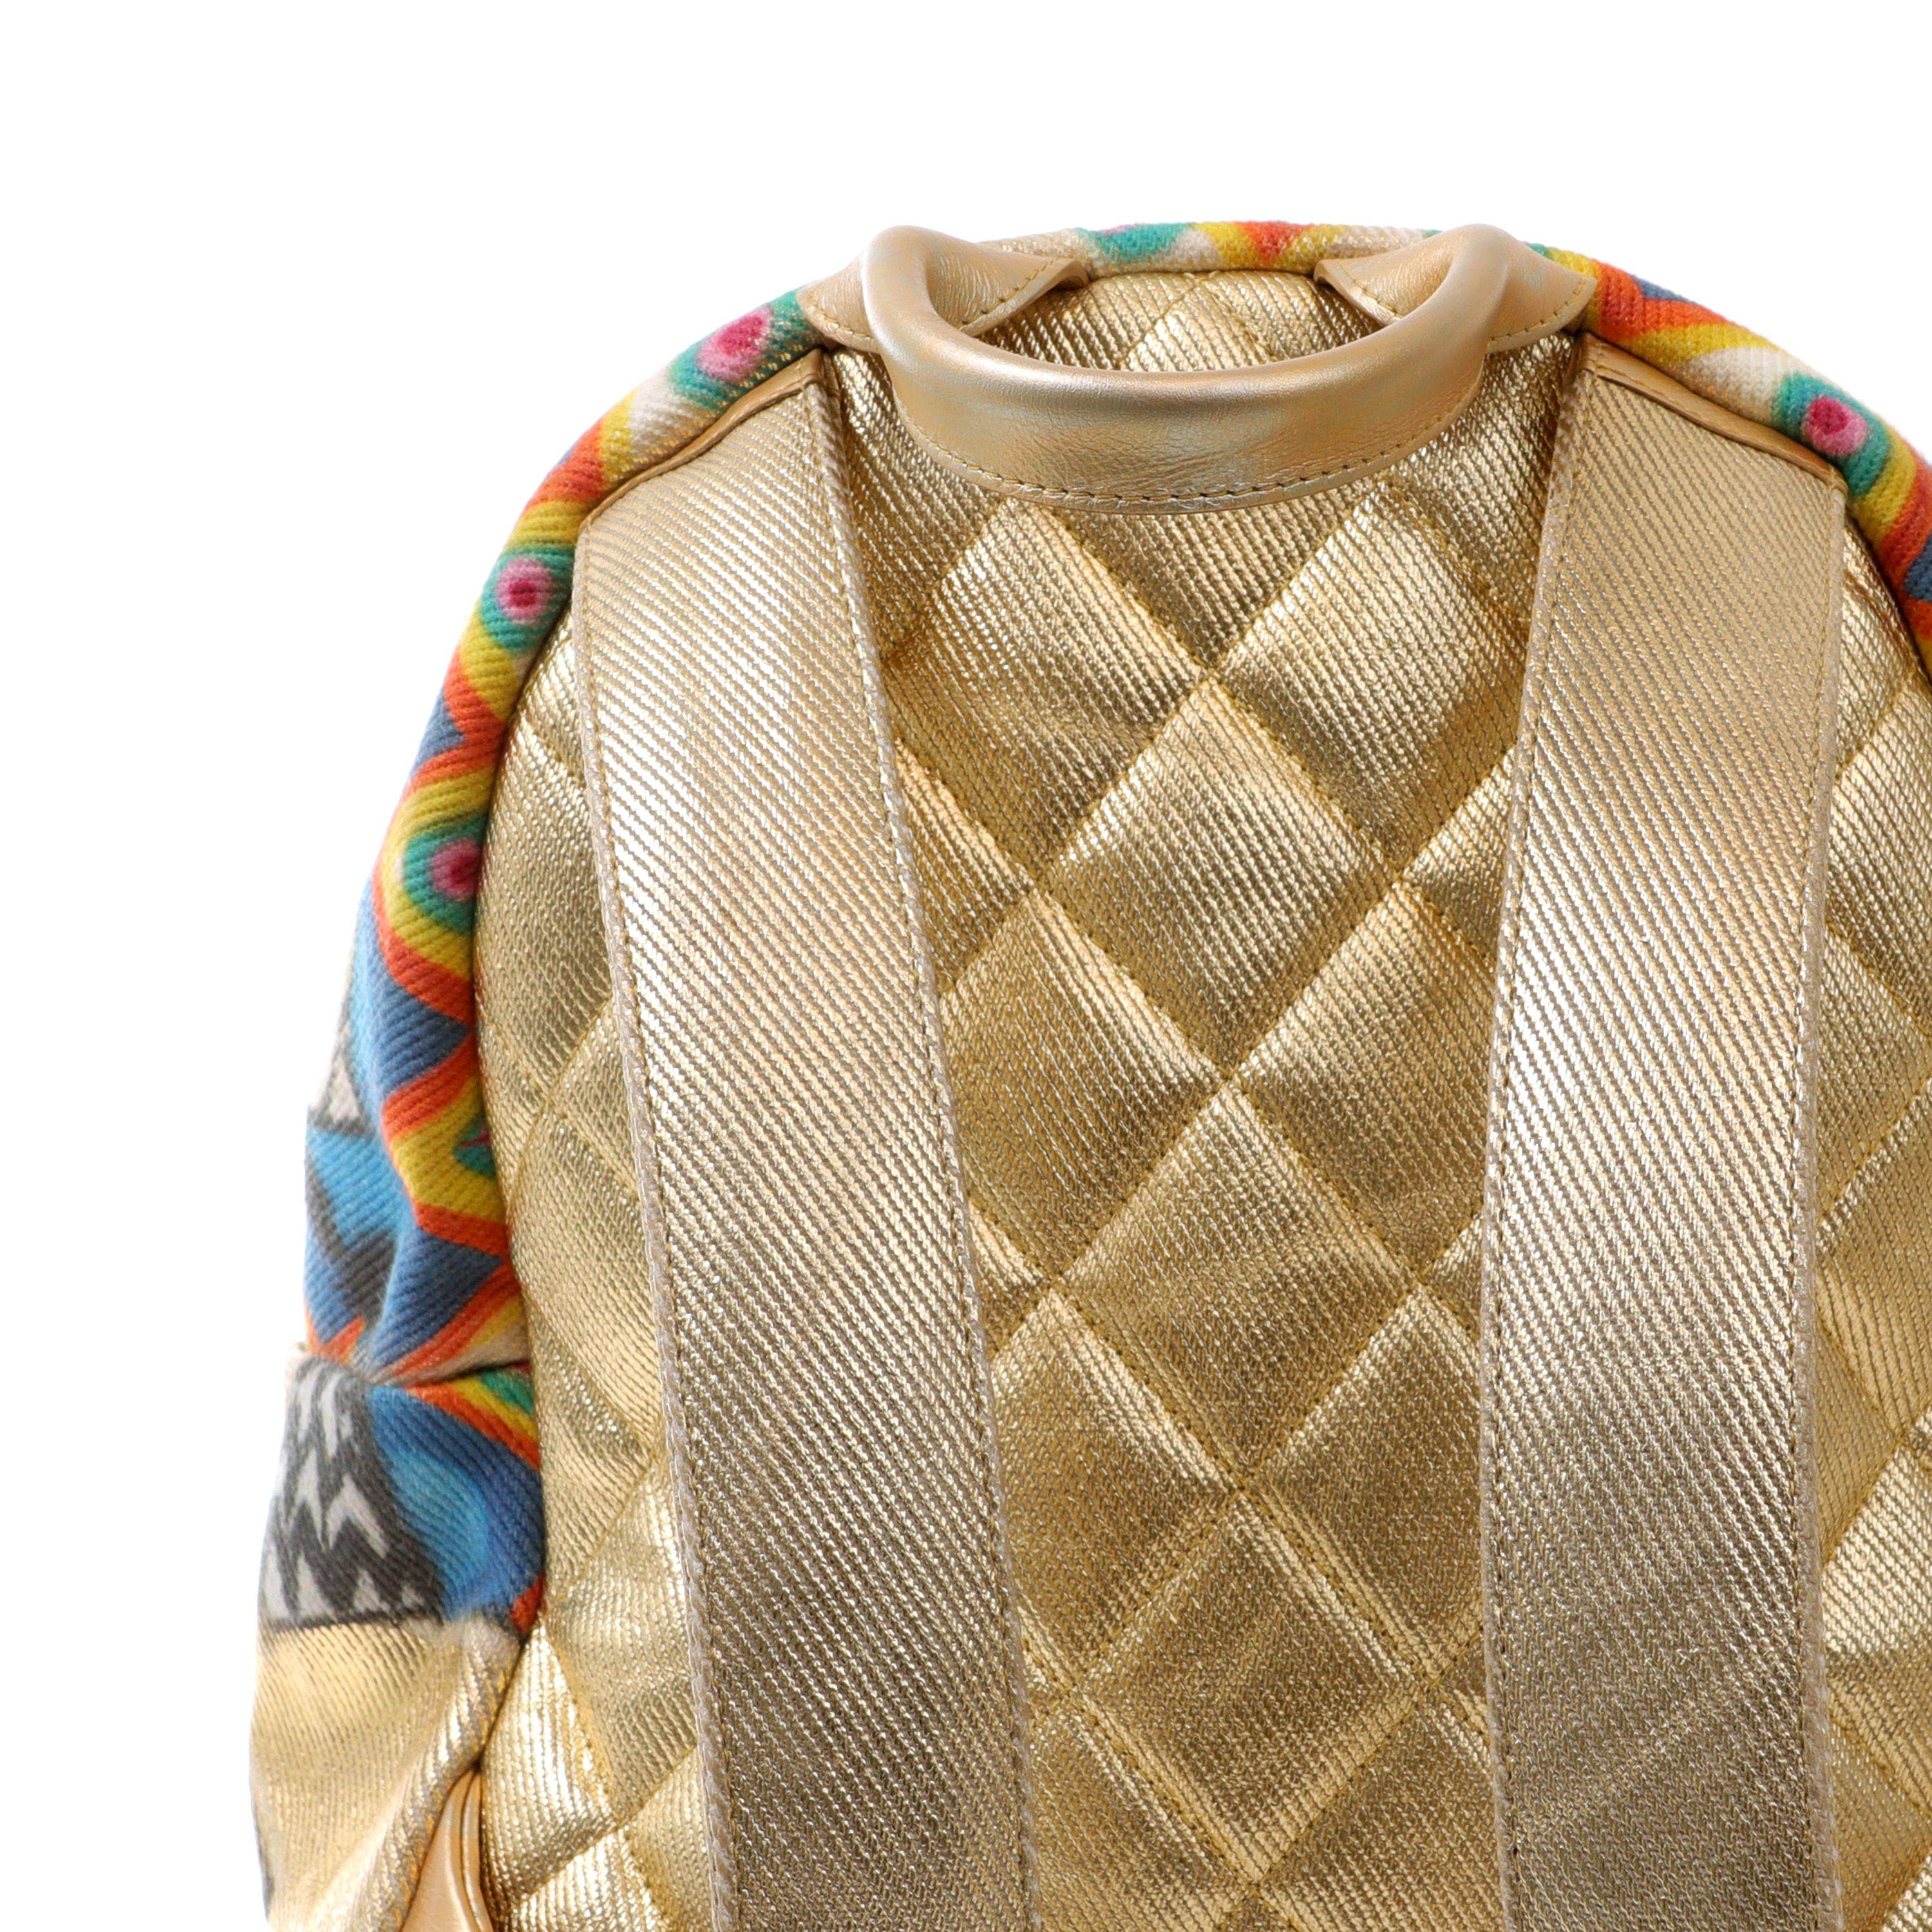 Chanel Gold Graffiti Street Spirit Unisex Backpack  In Excellent Condition For Sale In Palm Beach, FL